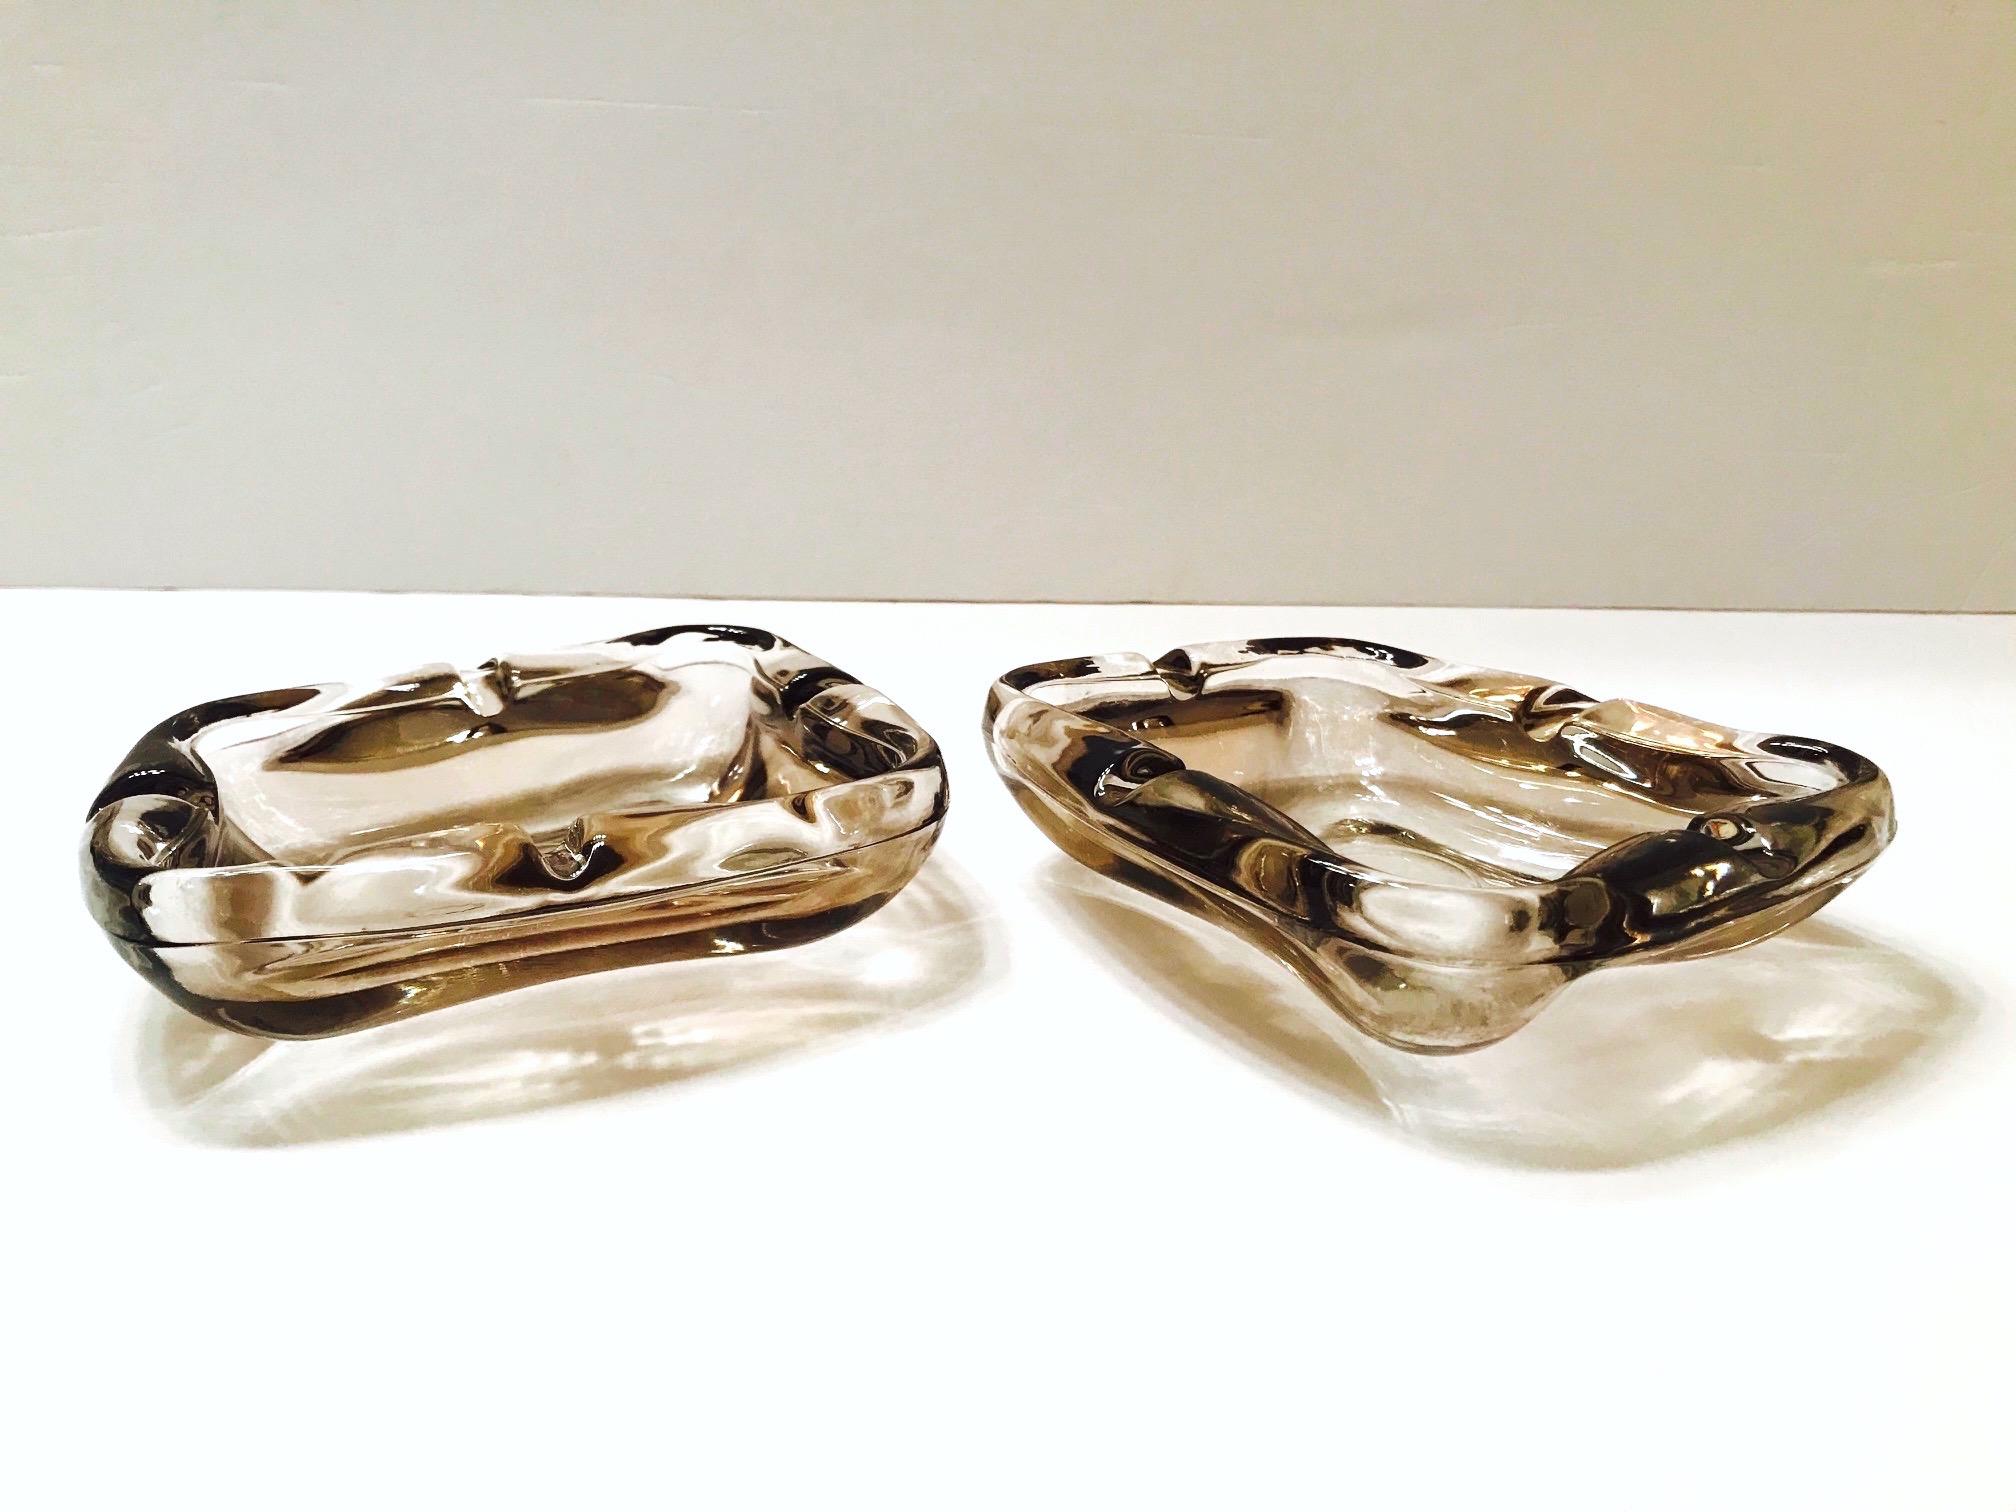 Pair of Mid-Century Modern cast glass ashtrays with handcut organic freeform design. Smoked glass in gradient hues of brown or gray depending on the surrounding light. Each ashtray is identical in scale and features four notches fitted for